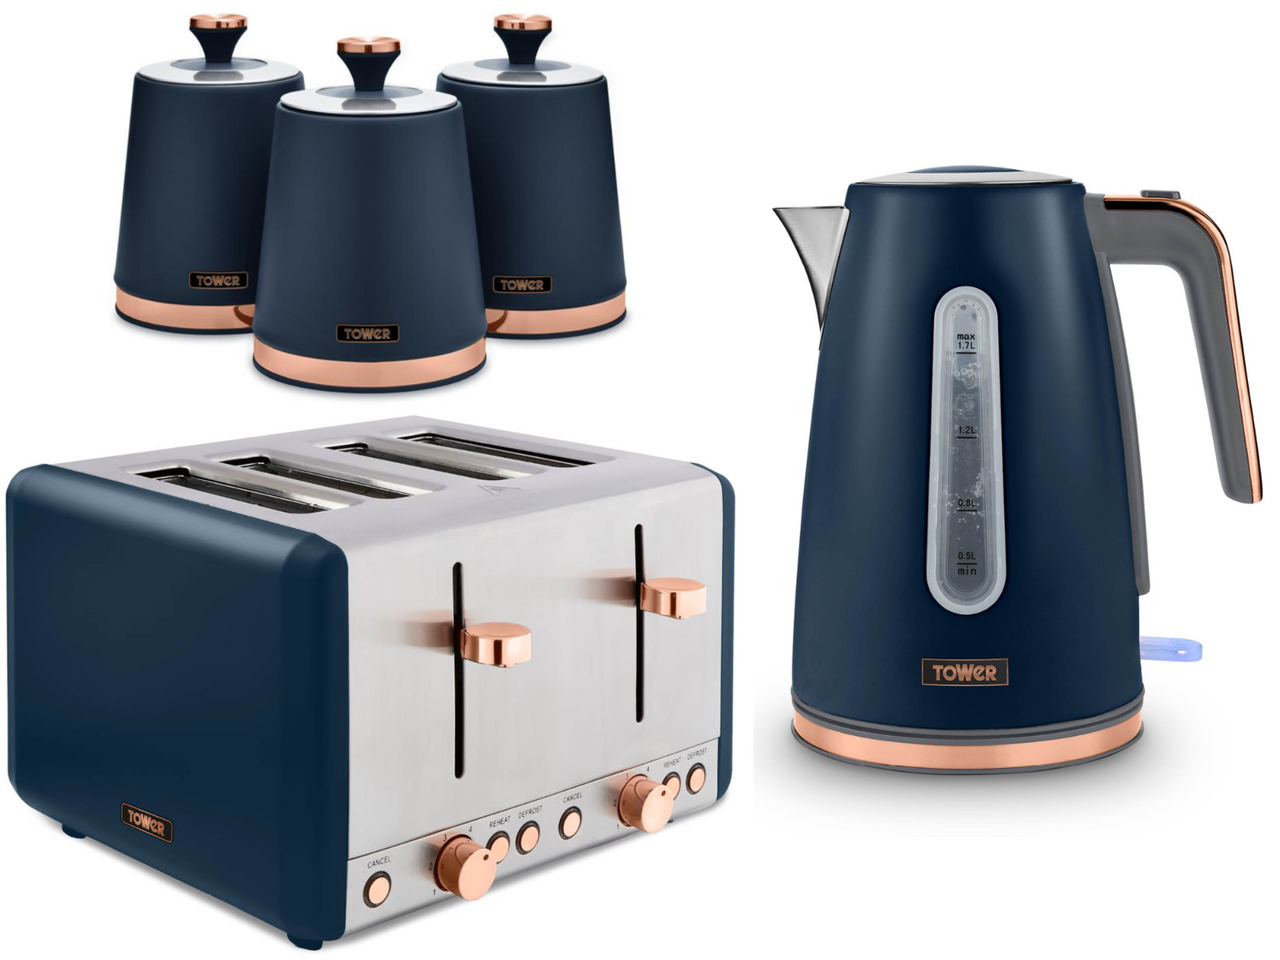 Tower Cavaletto Jug Kettle, 4 Slice Toaster & Canisters Set in Midnight Blue/Rose Gold